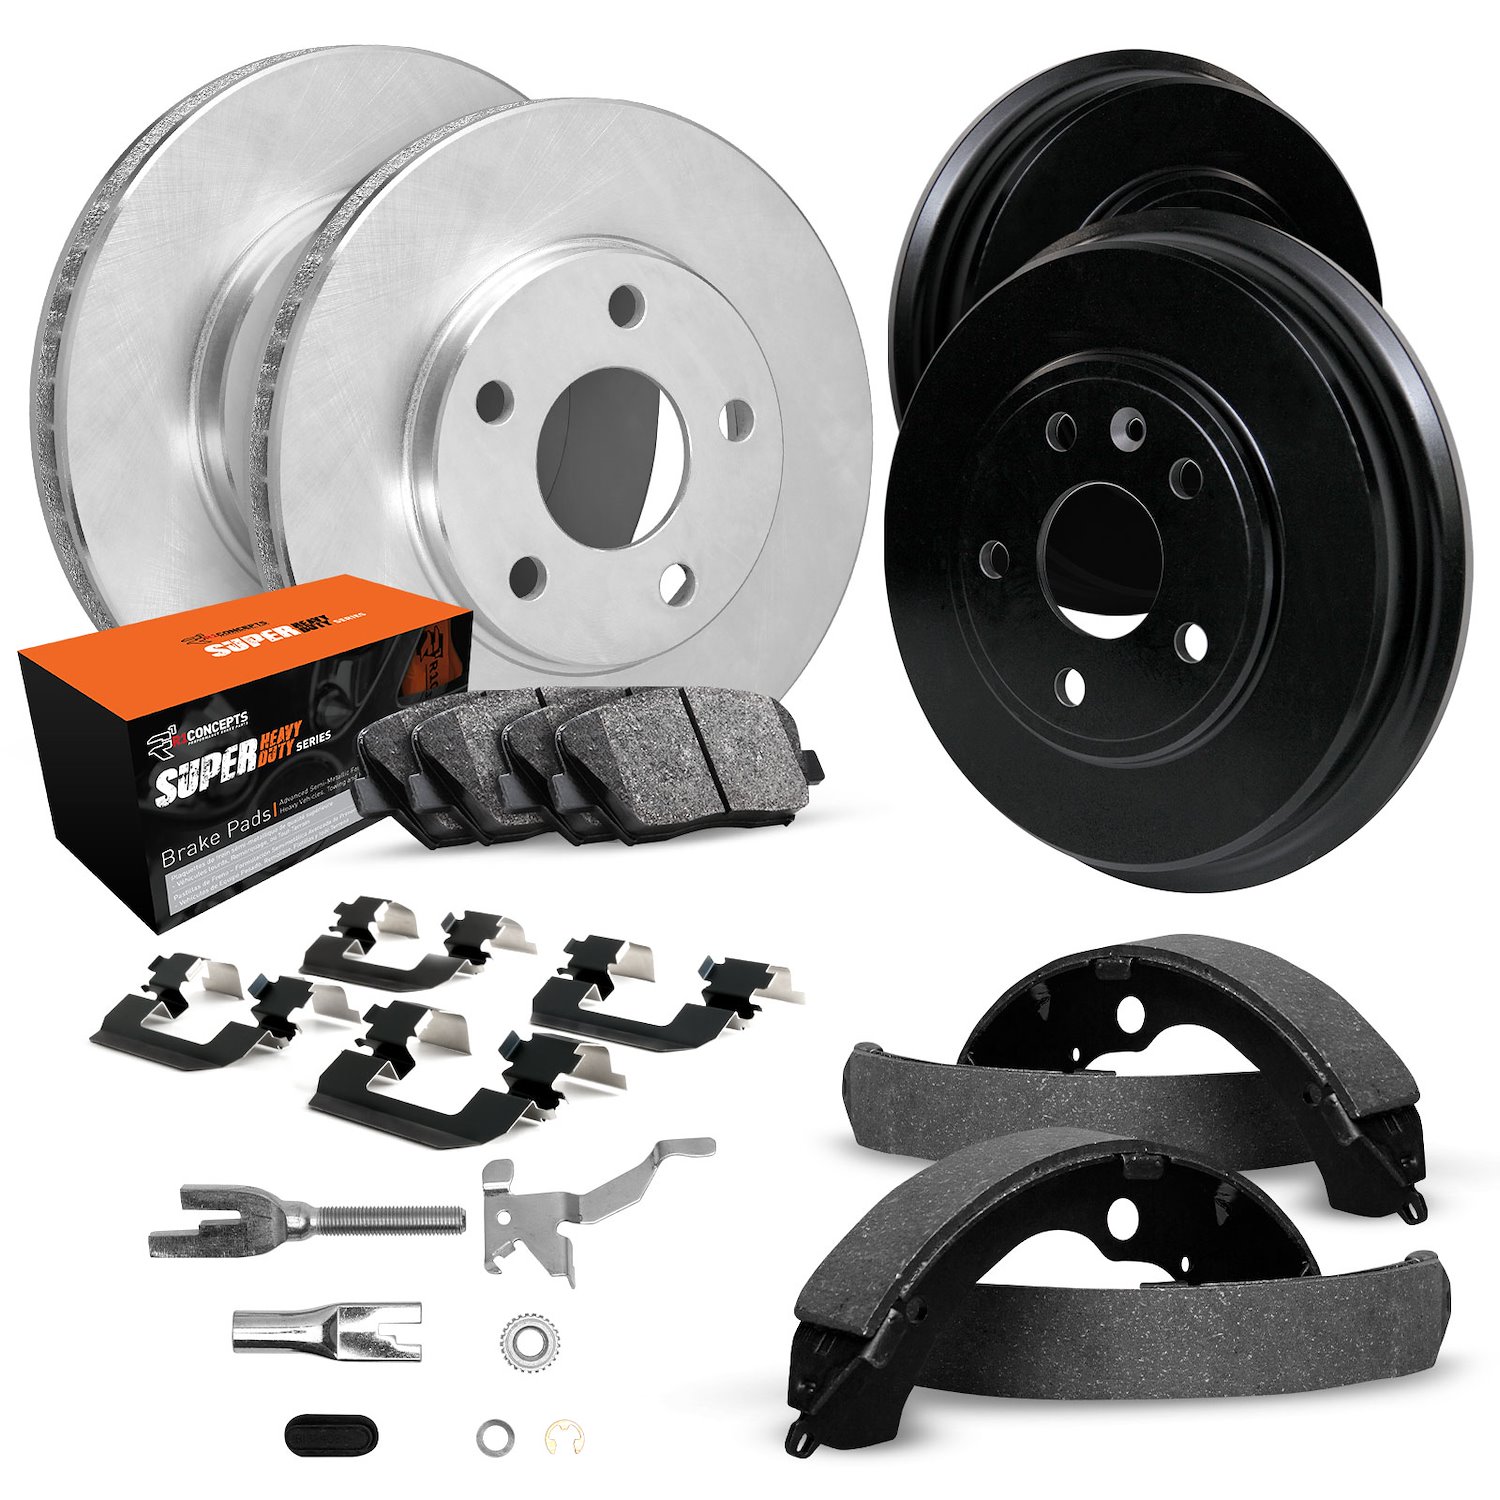 E-Line Blank Brake Rotor & Drum Set w/Super-Duty Pads, Shoes, Hardware, & Adjusters, 2002-2007 GM, Position: Front & Rear